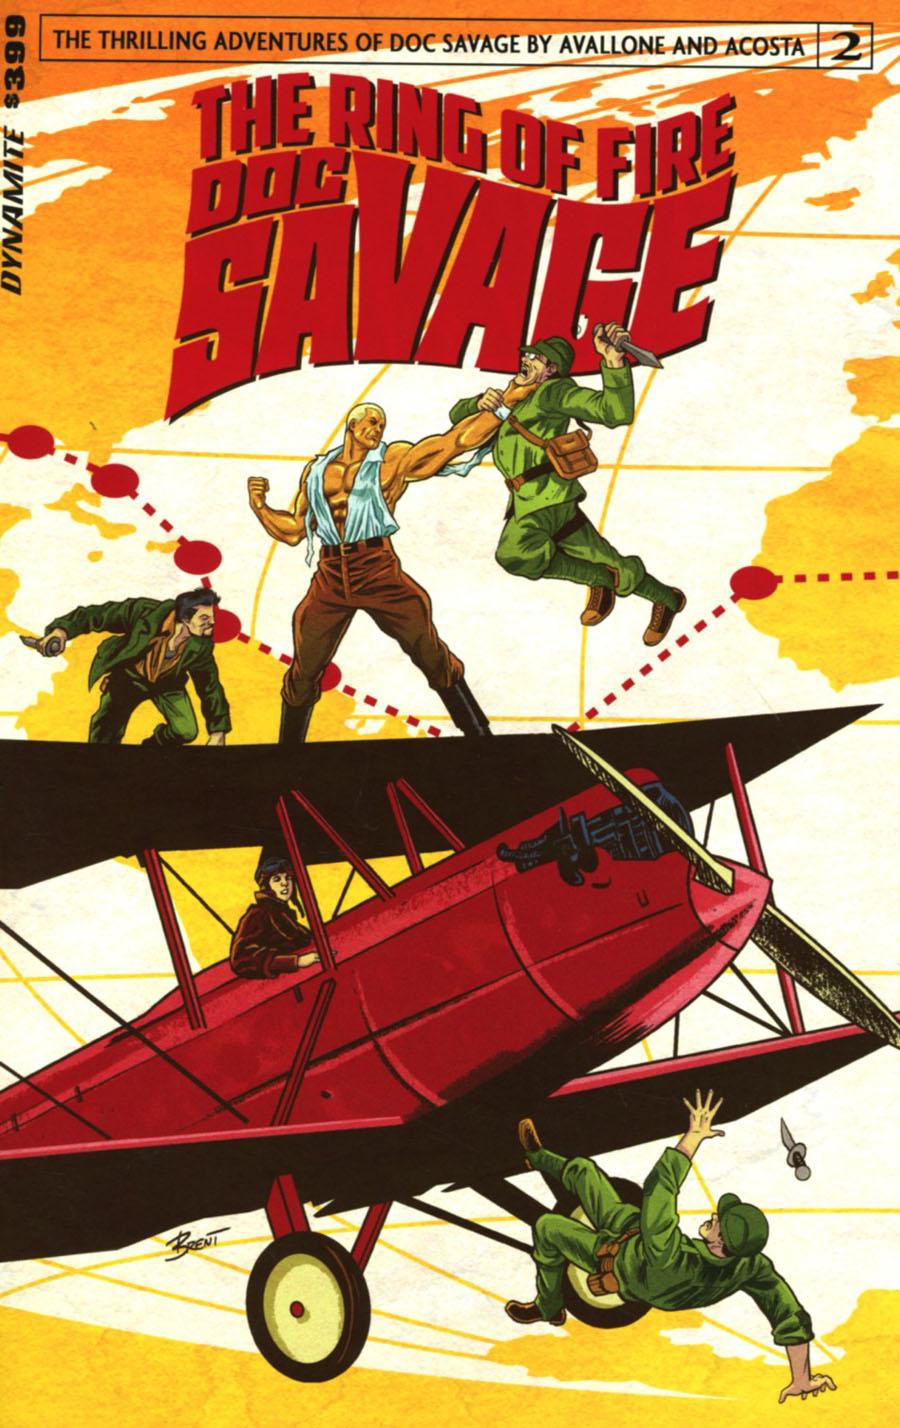 Doc Savage Ring Of Fire Vol. 1 #2